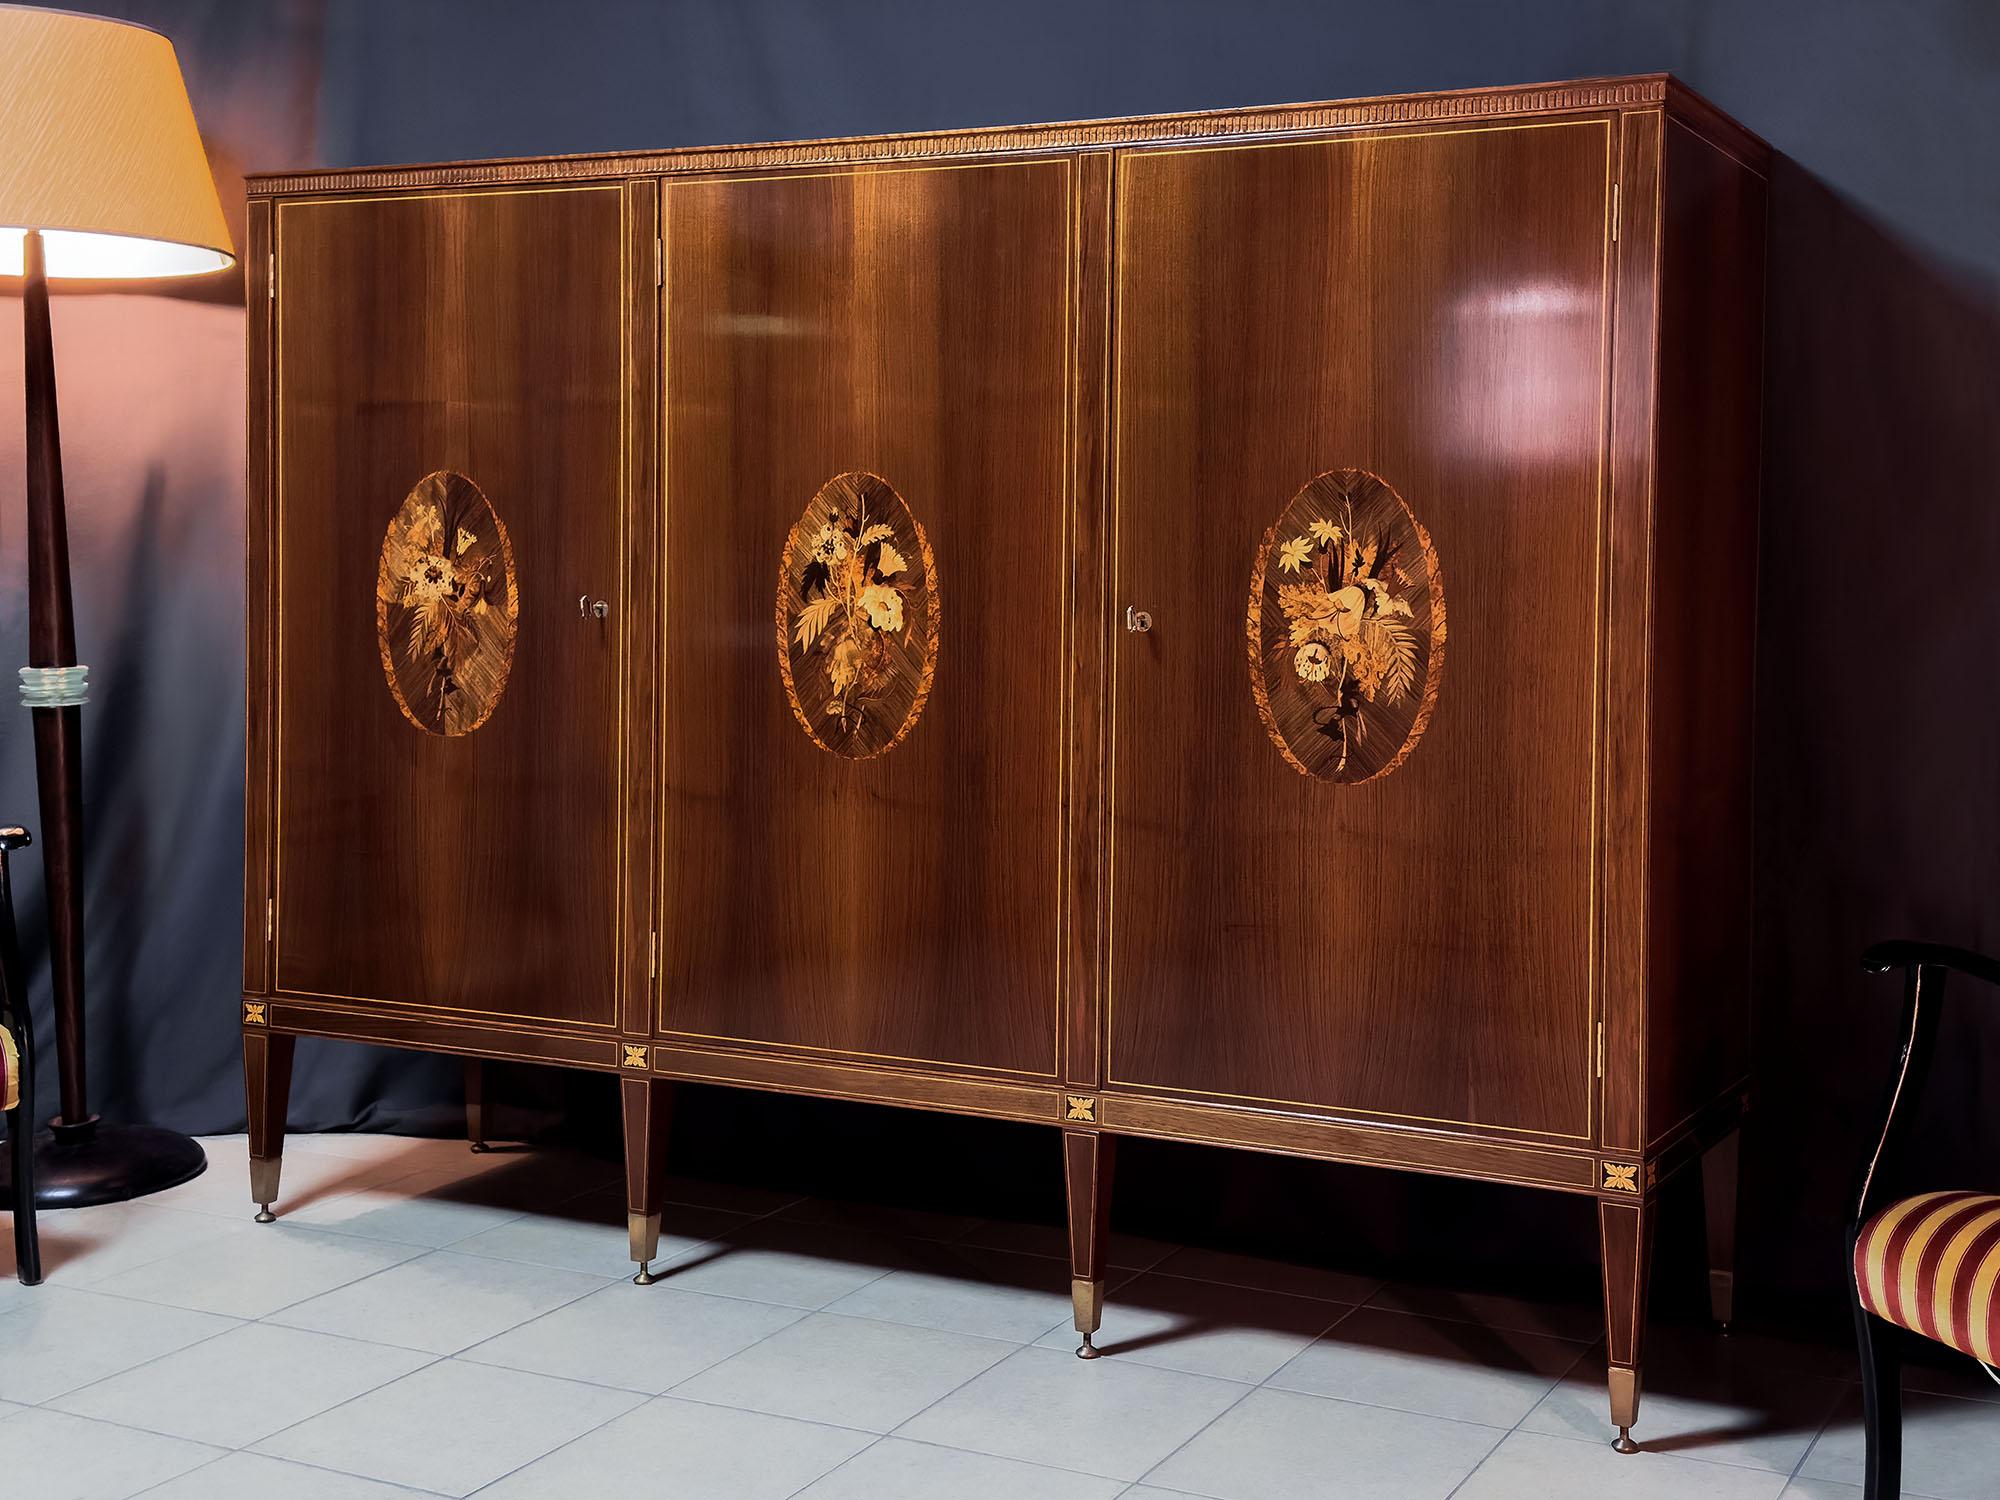 Italian Mid-Century Sideboard with Inlays by Anzani for Marelli & Colico, 1950s For Sale 5